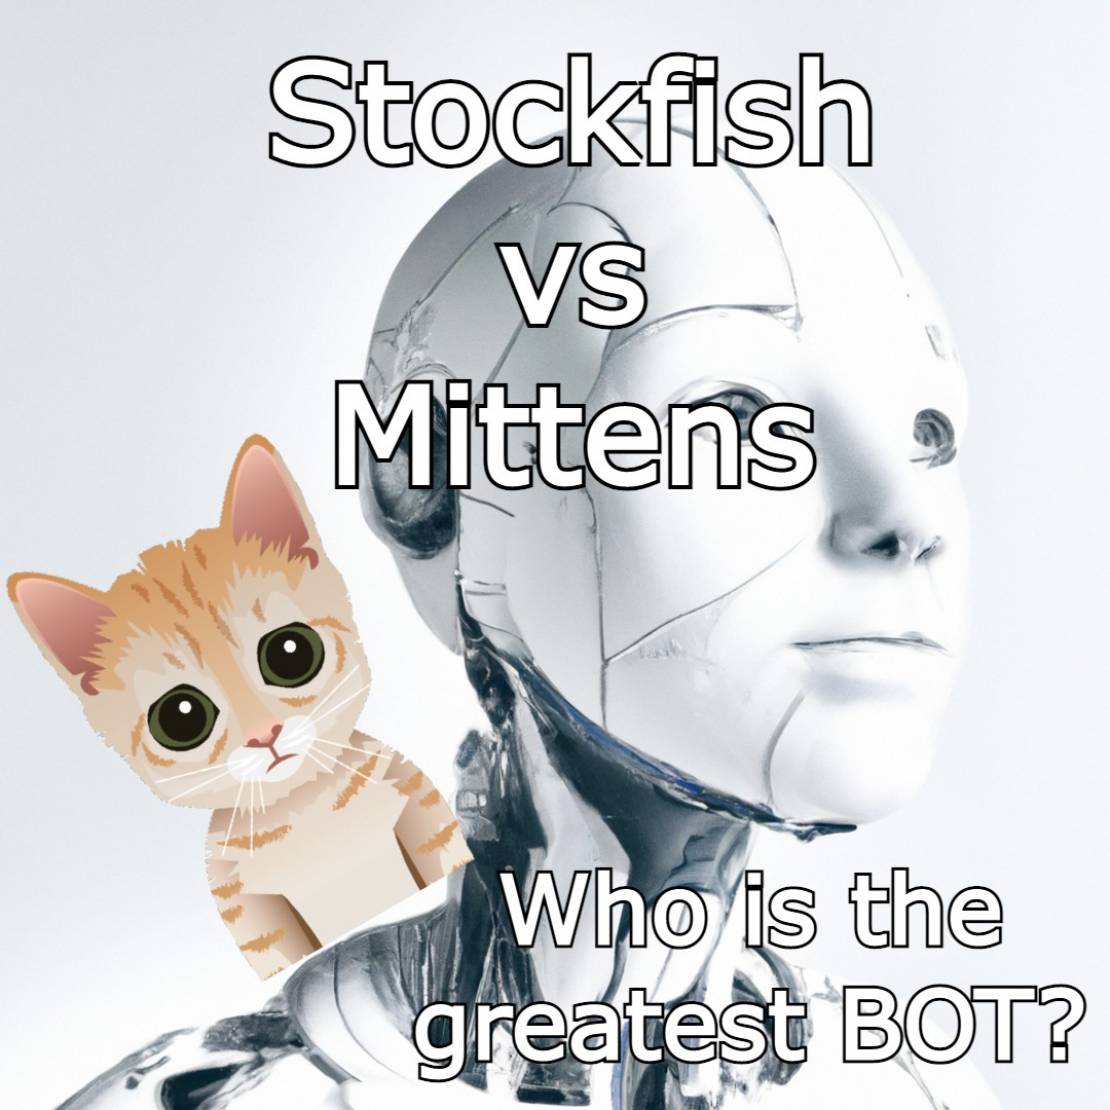 Mittens vs Stockfish. Who can be the greatest bot of all times?